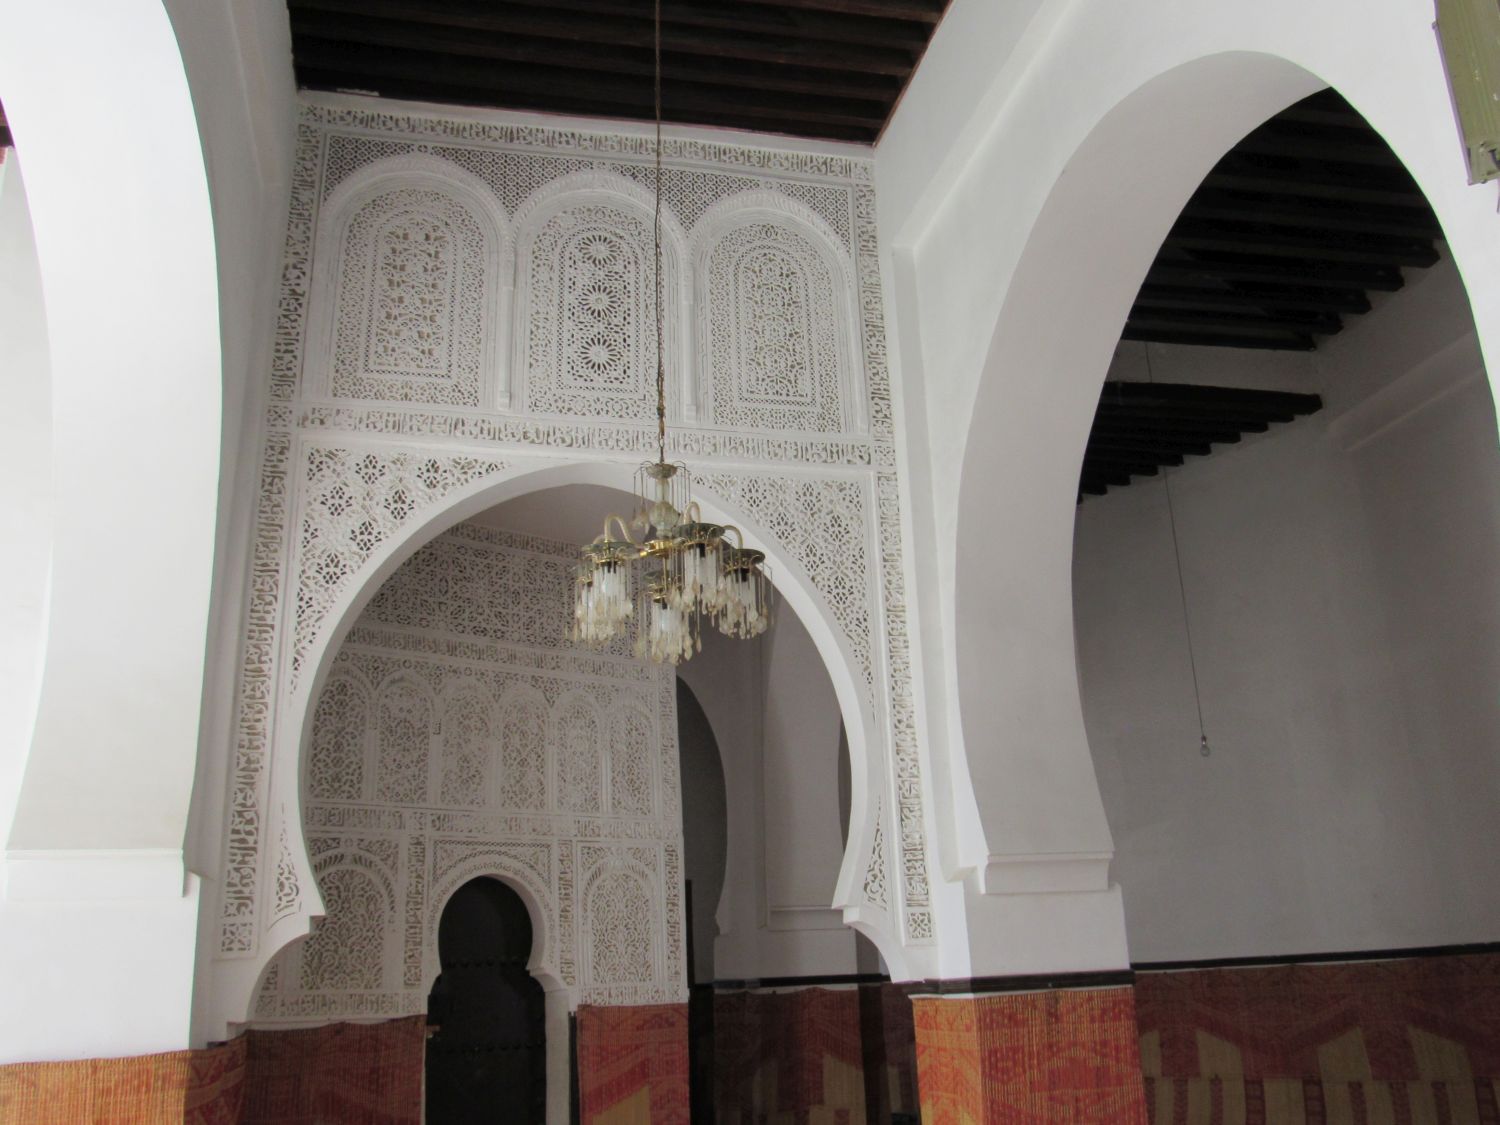 Interior view, hallway arch decorated with carved geometric patterns